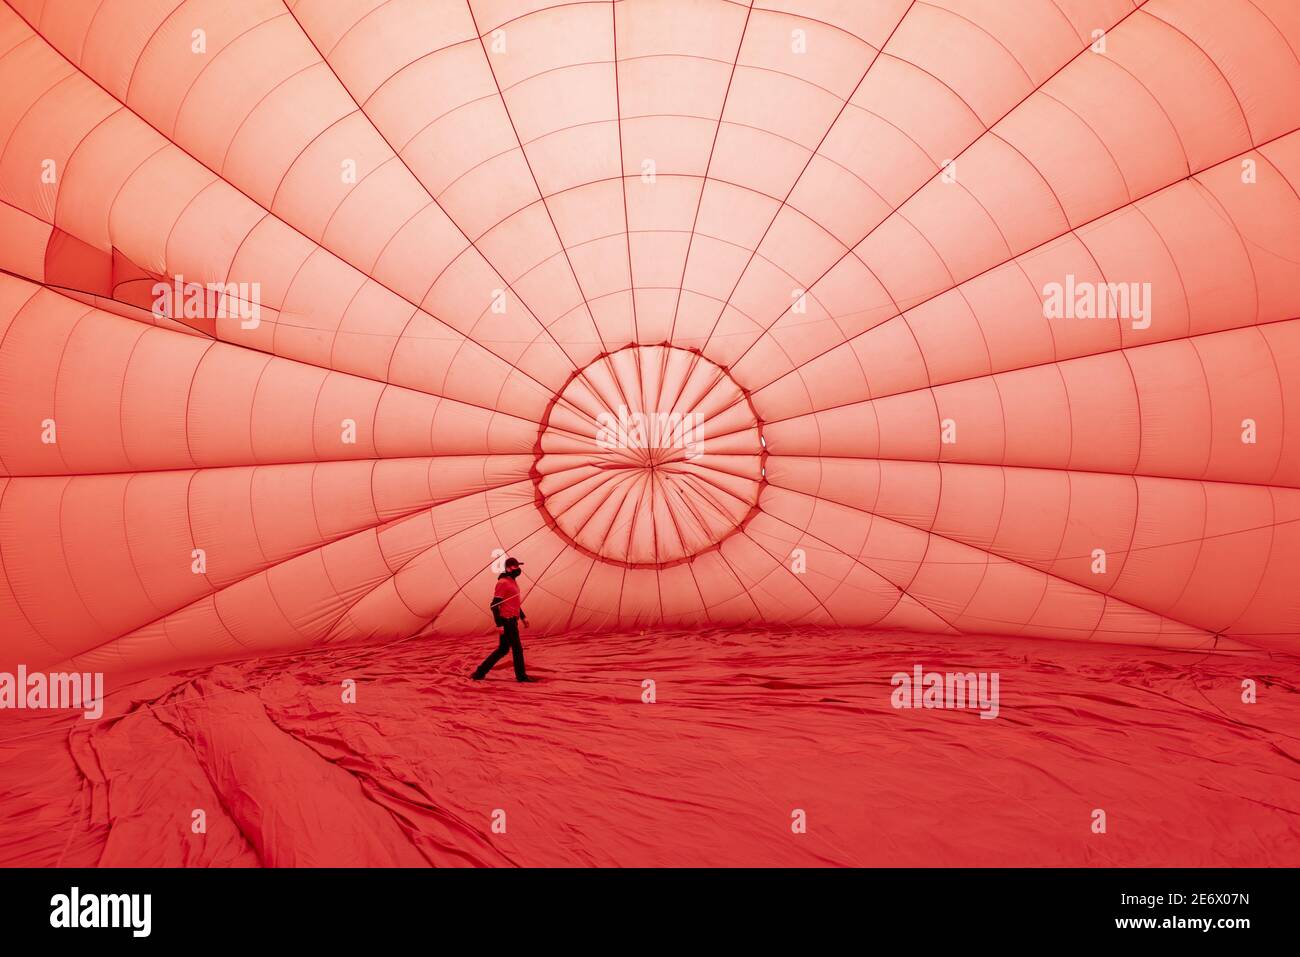 France, Indre et Loire, Loches, man walking inside a hot air balloon while being inflated Stock Photo